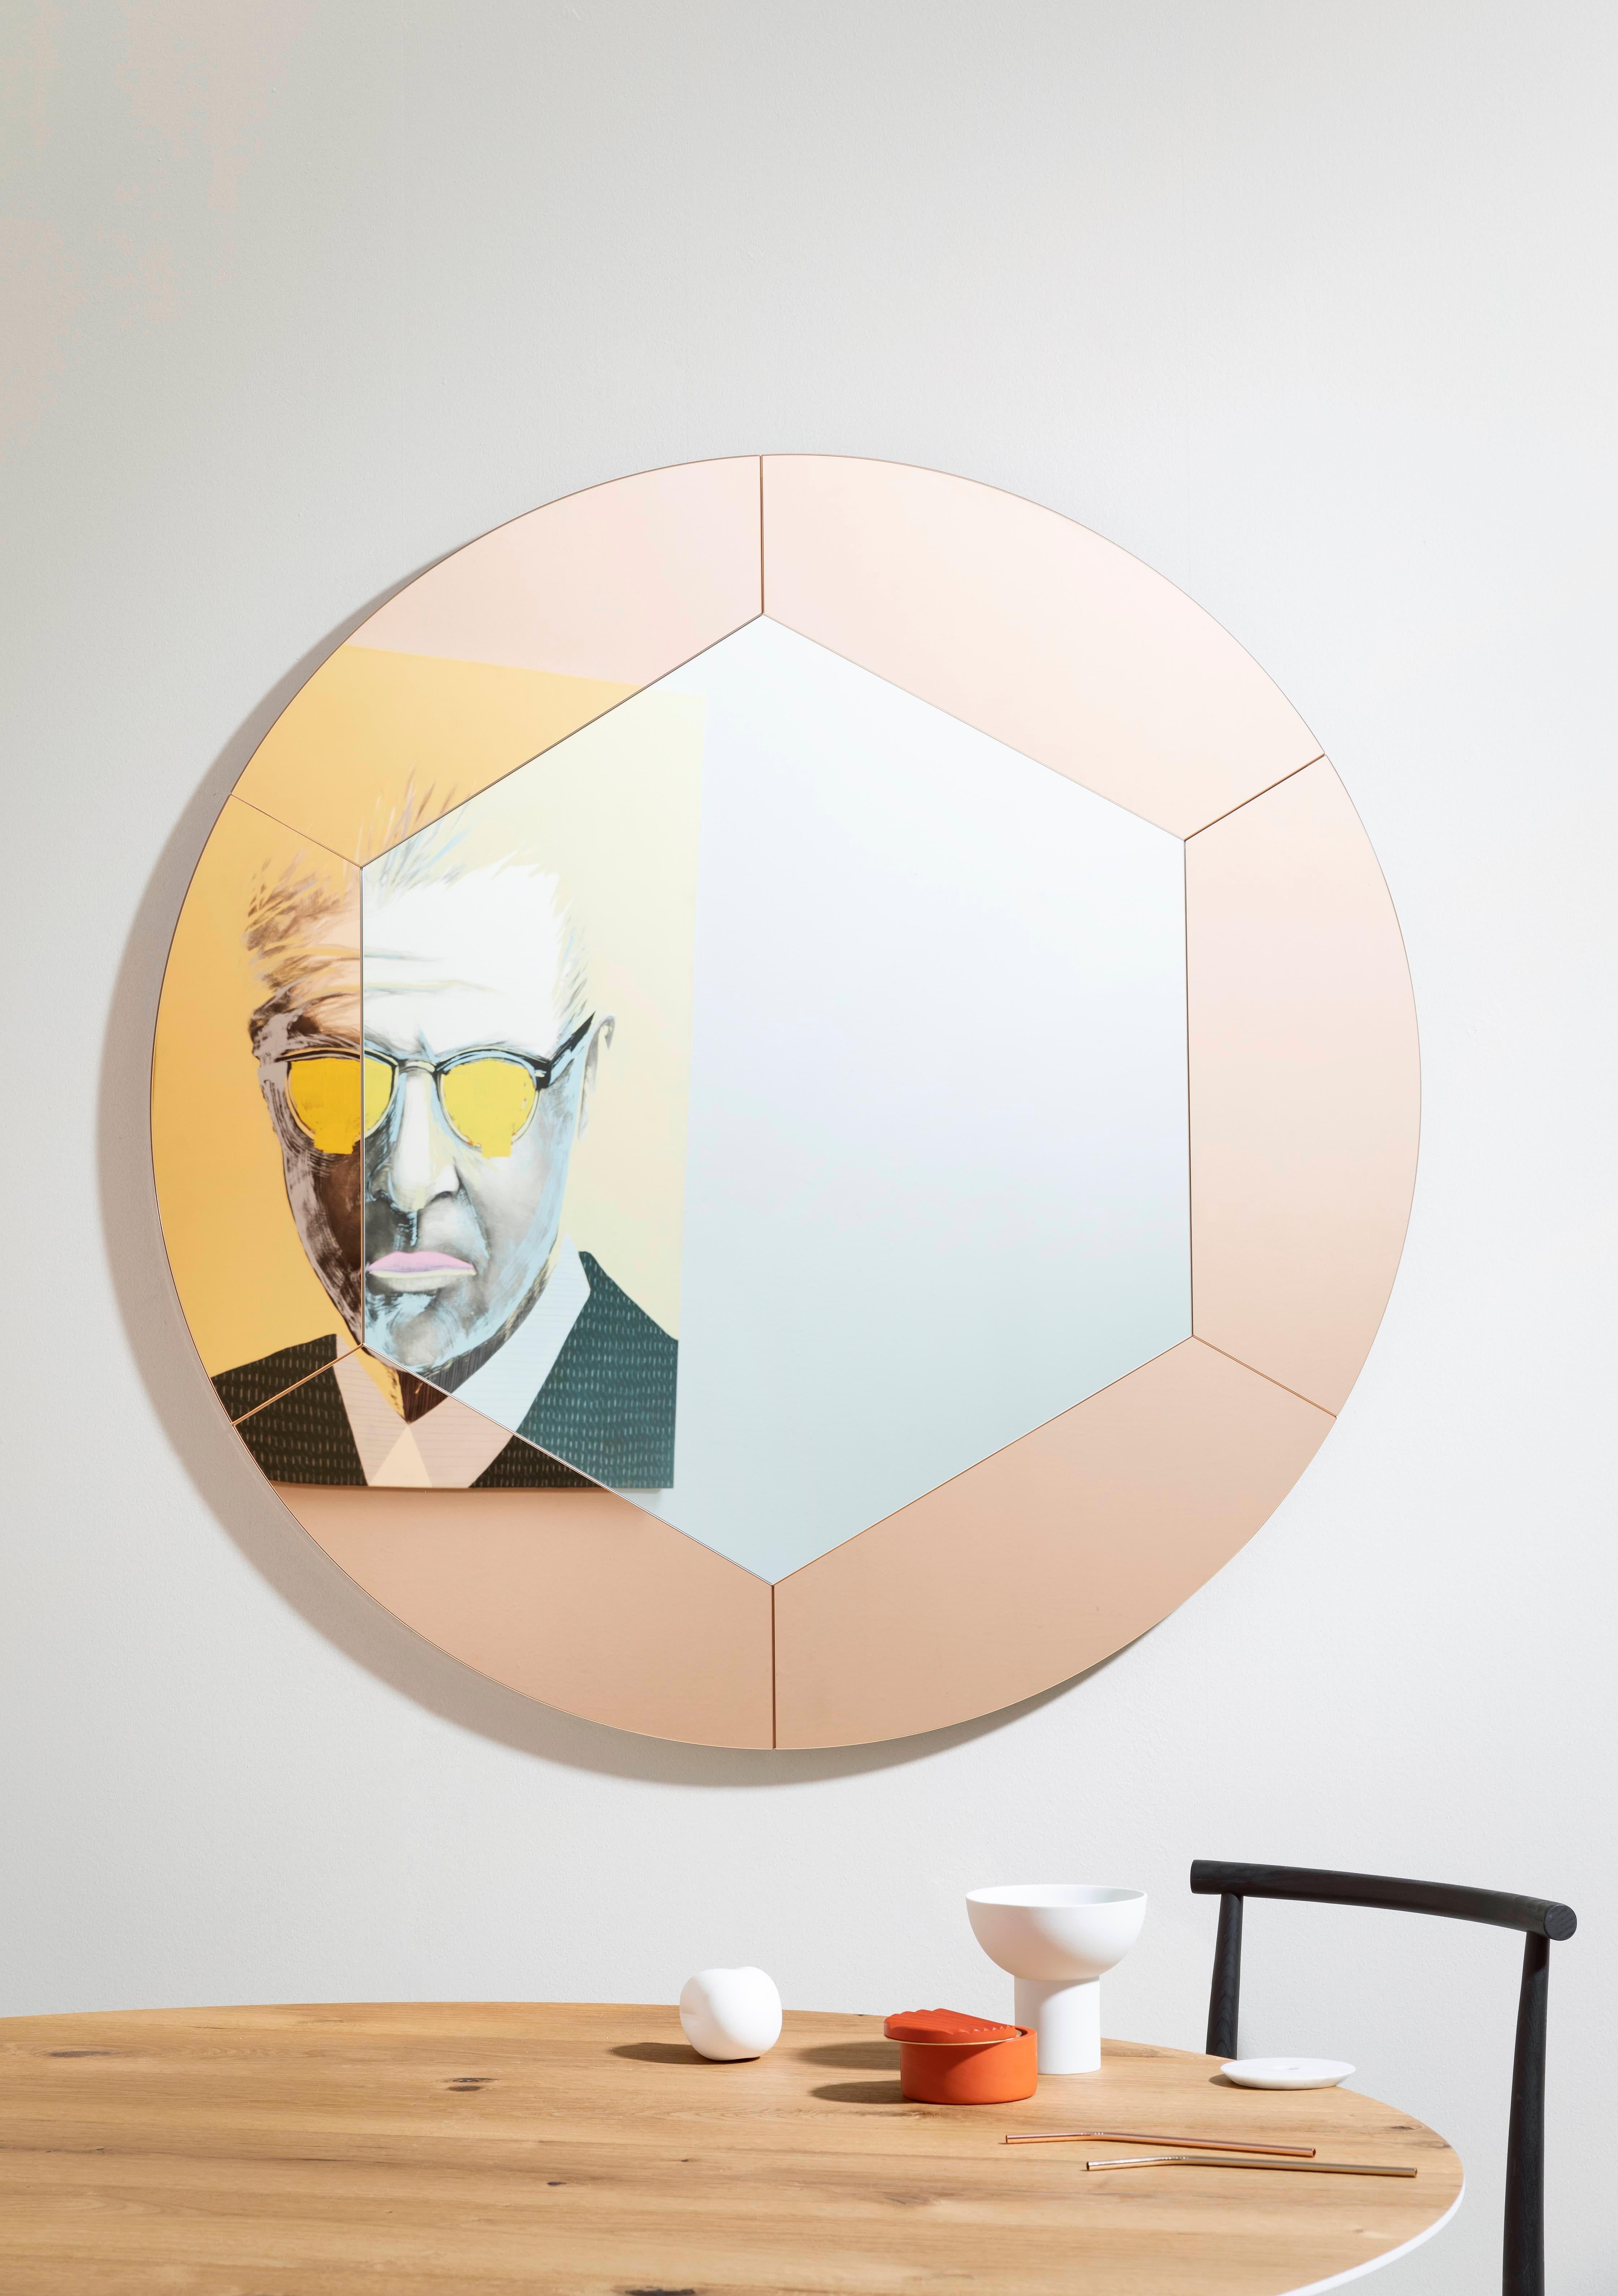 With an essential but evocative palette, Tropicana mixes soft colors with primary geometric shapes, bringing the mirror to have a suggestive and inspiring character.

Mirrors available in different colors combined with geometric shapes: hexagon